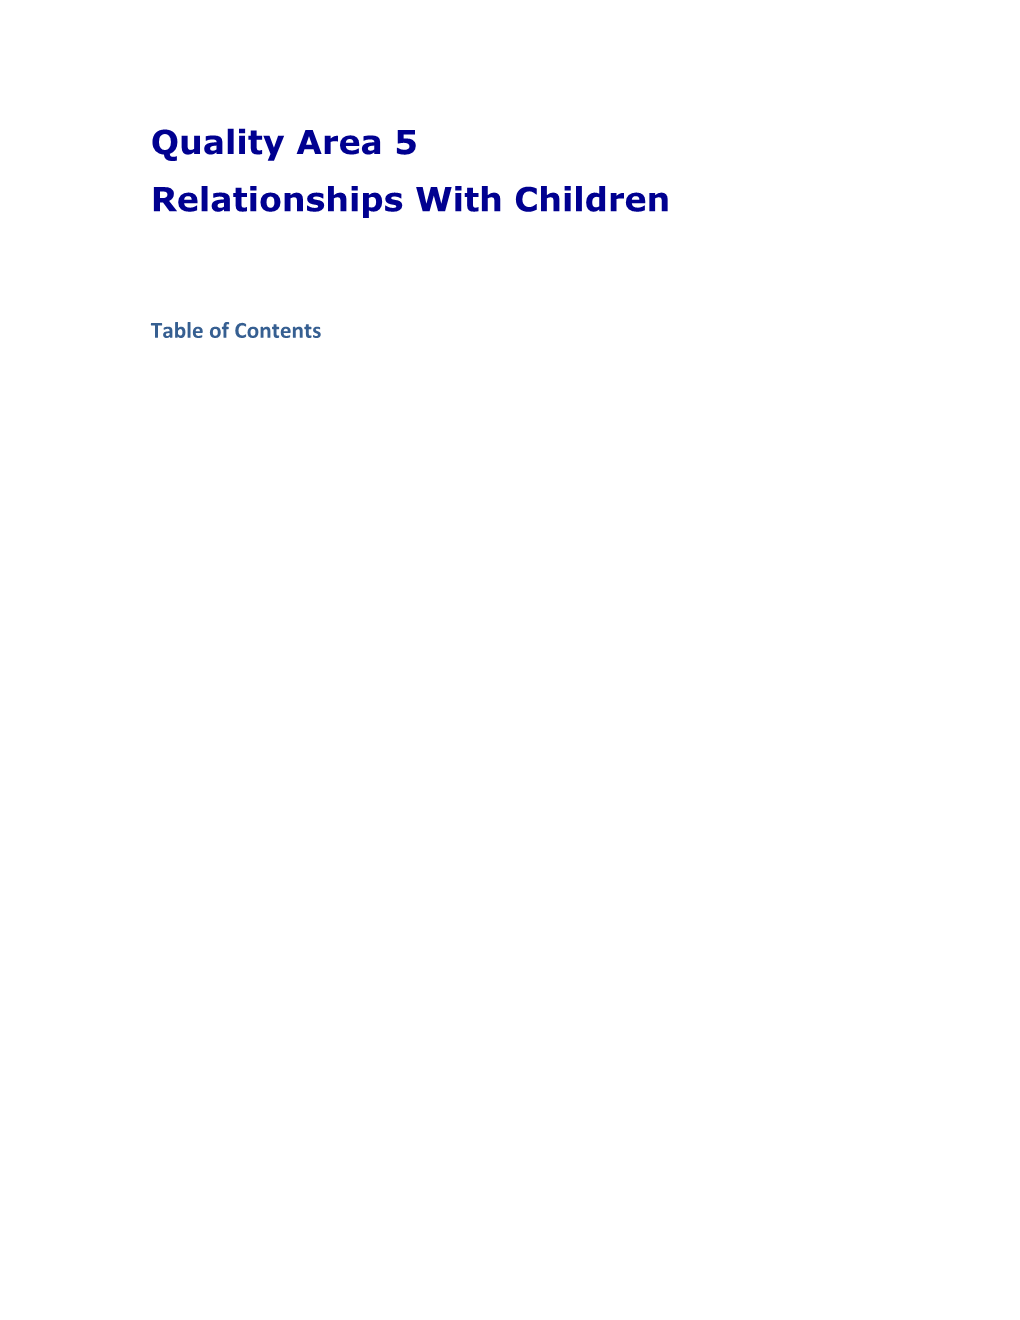 Relationships with Children